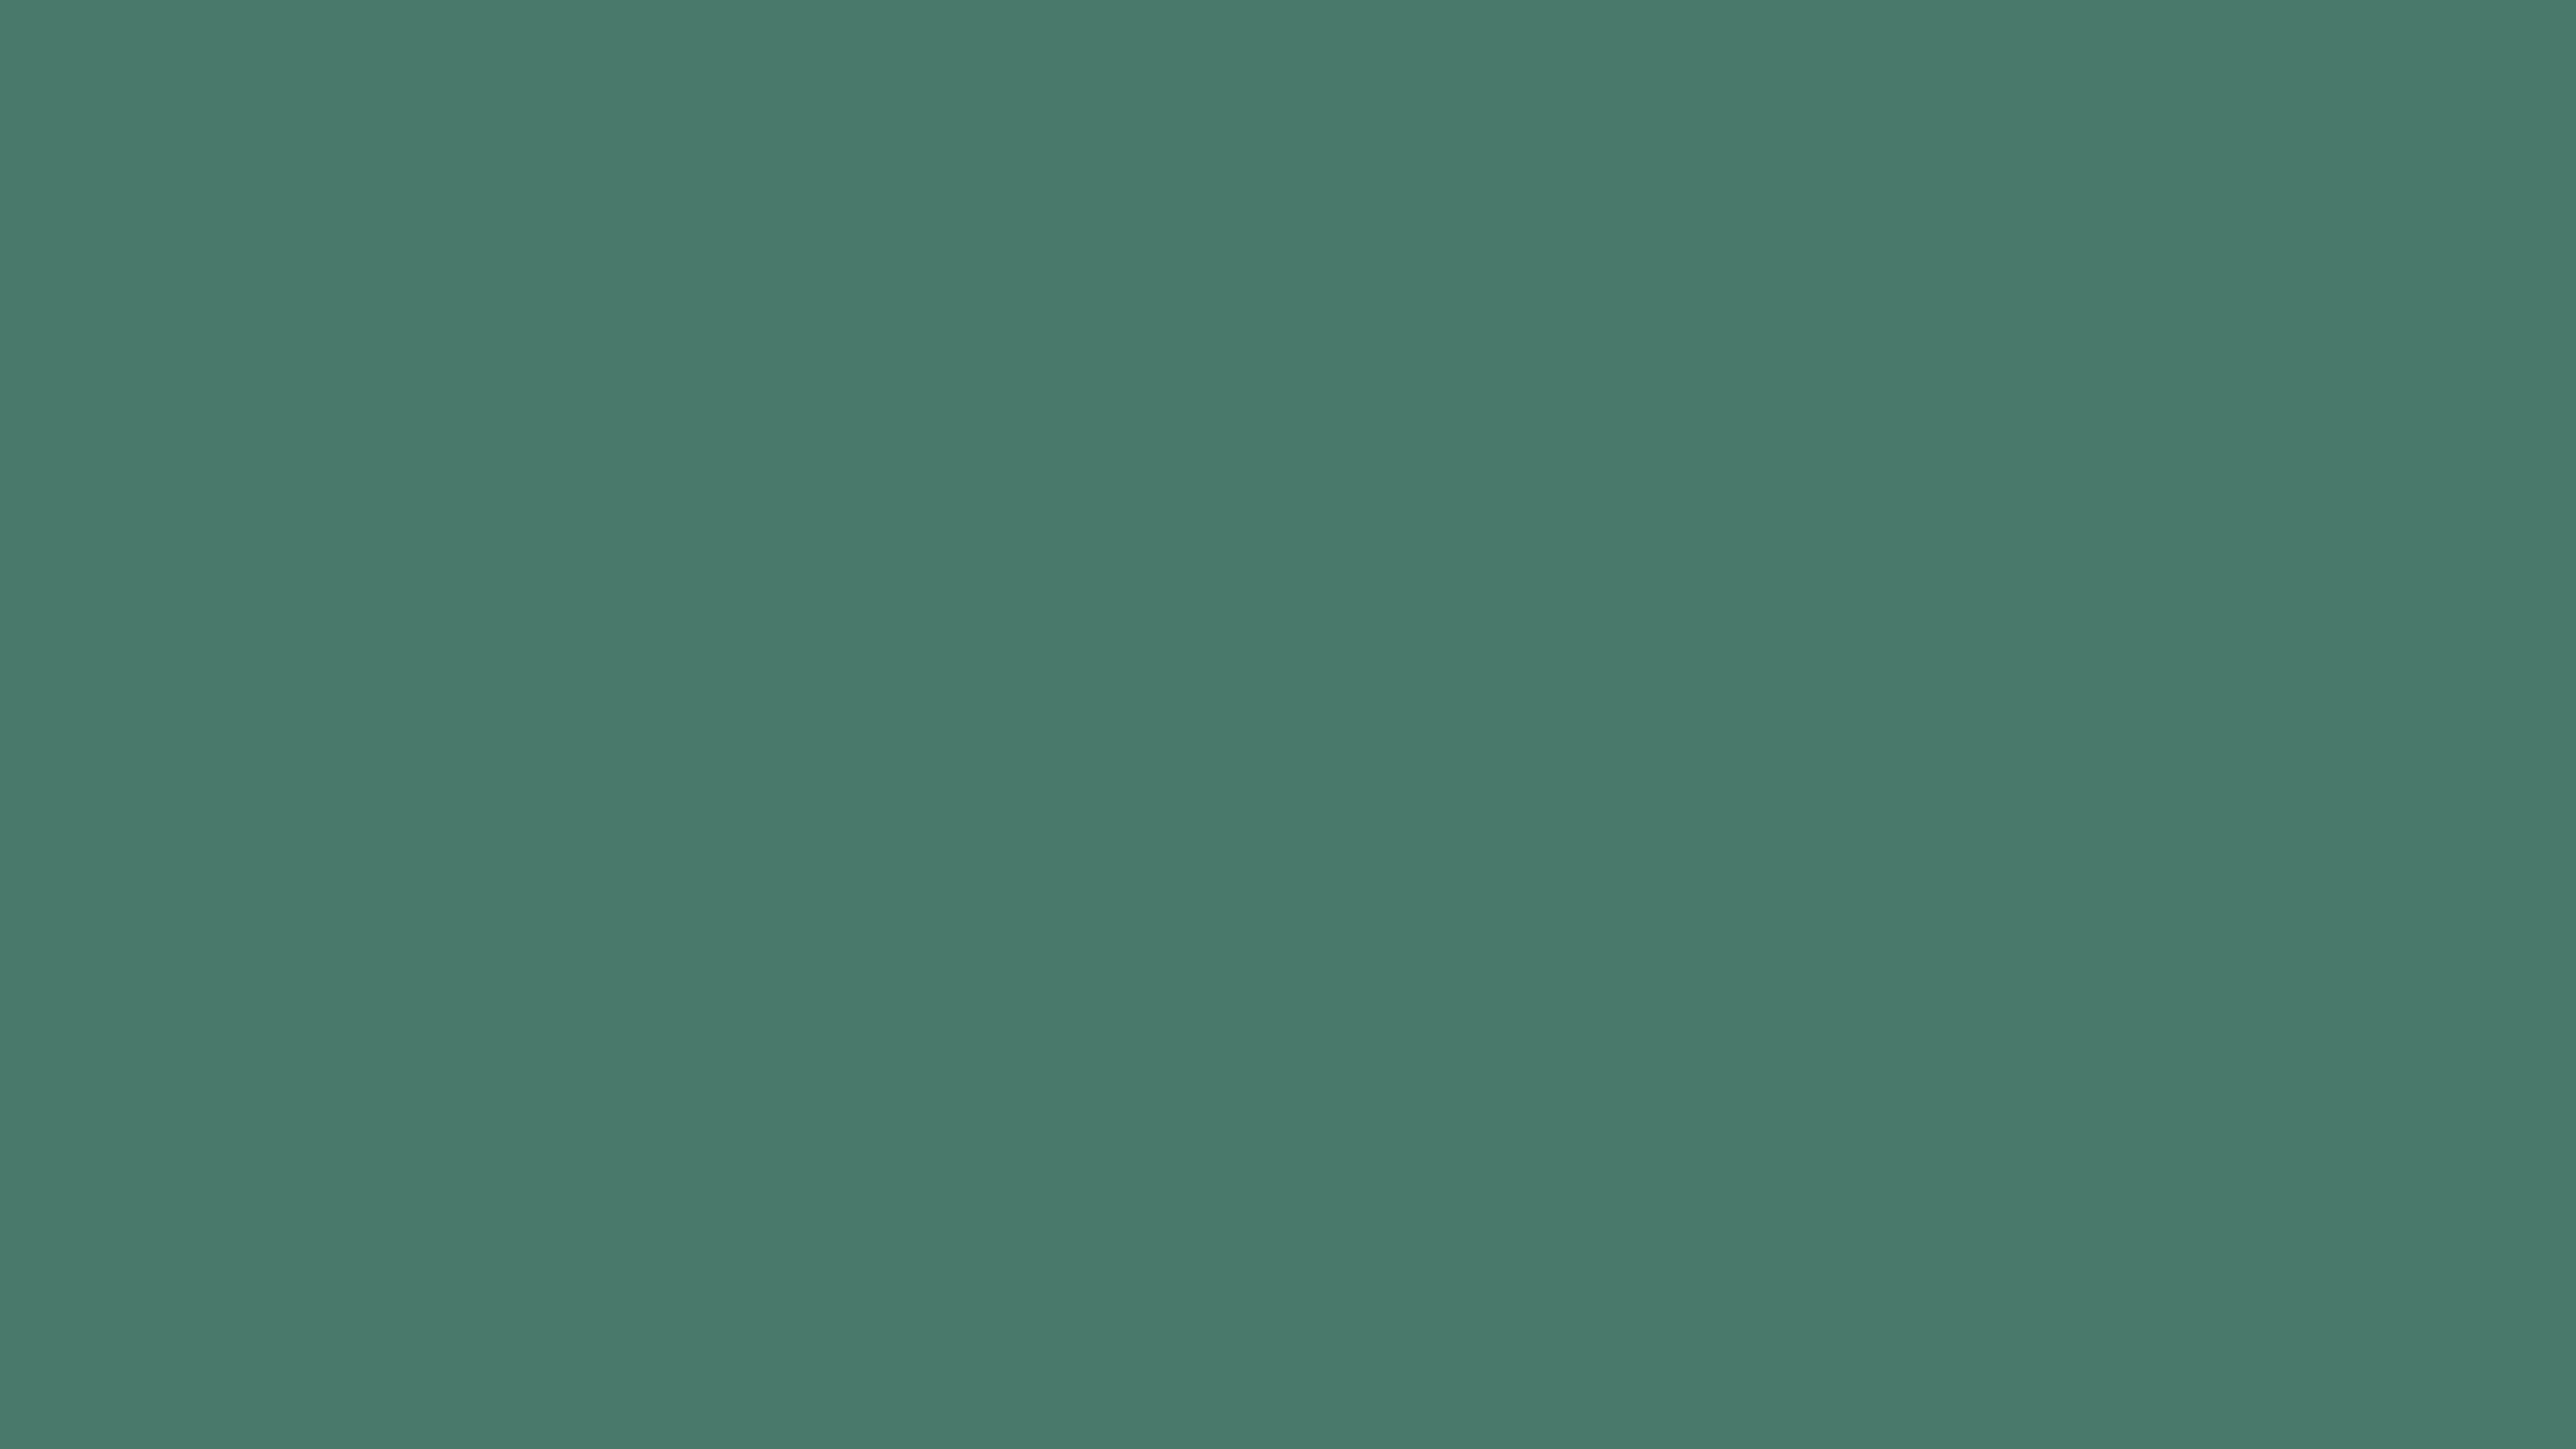 4096x2304 Hookers Green Solid Color Background